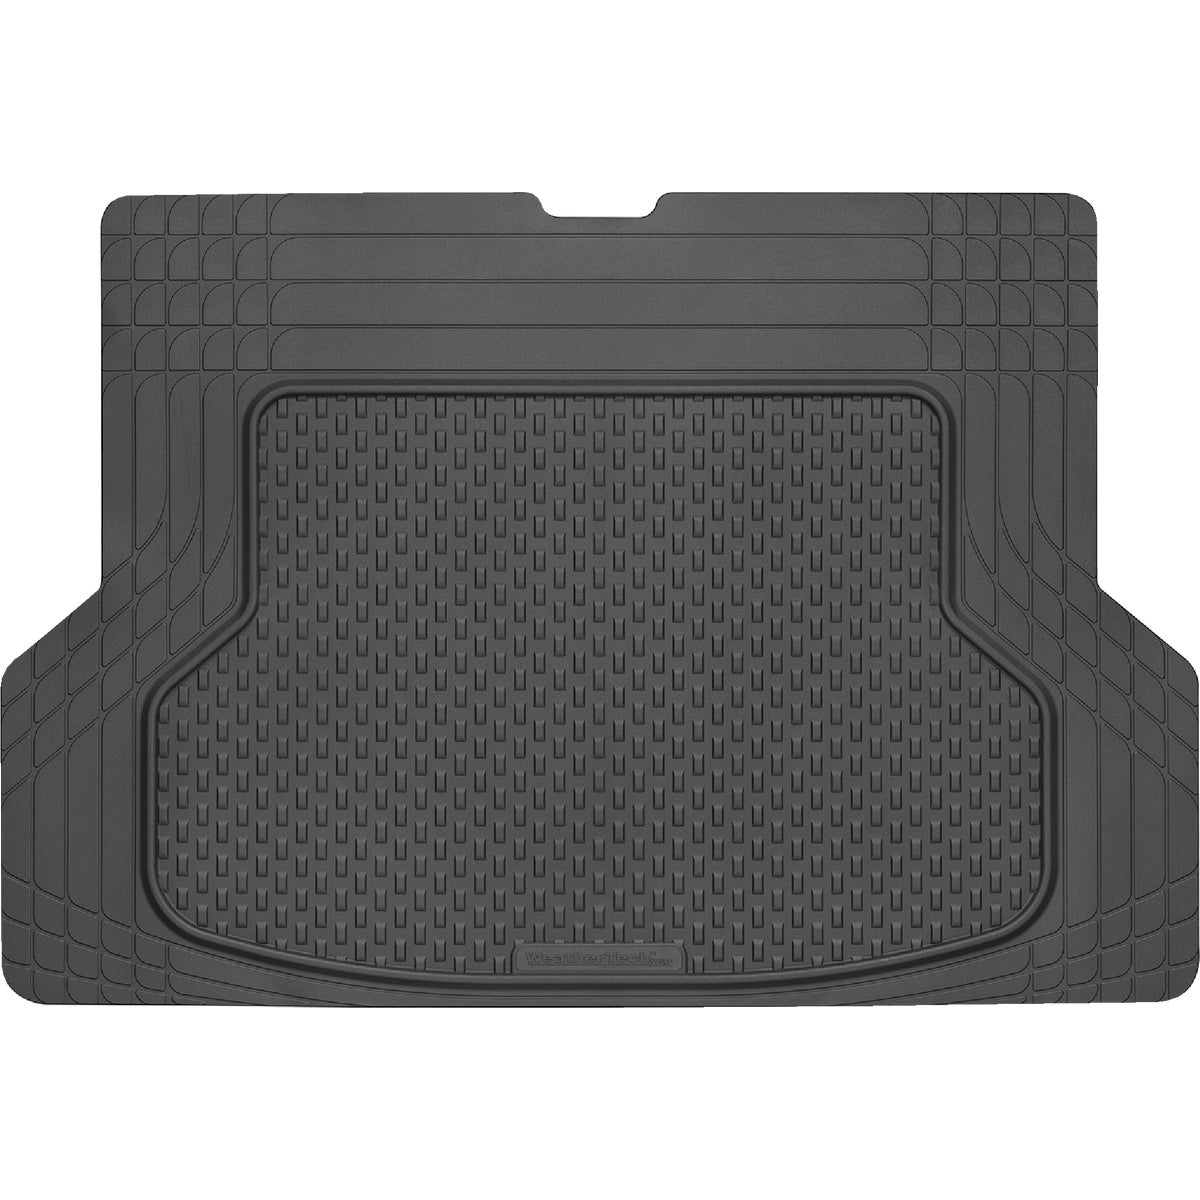 Item 570596, Universal cargo mats protect vehicle trunk or cargo area from normal wear 